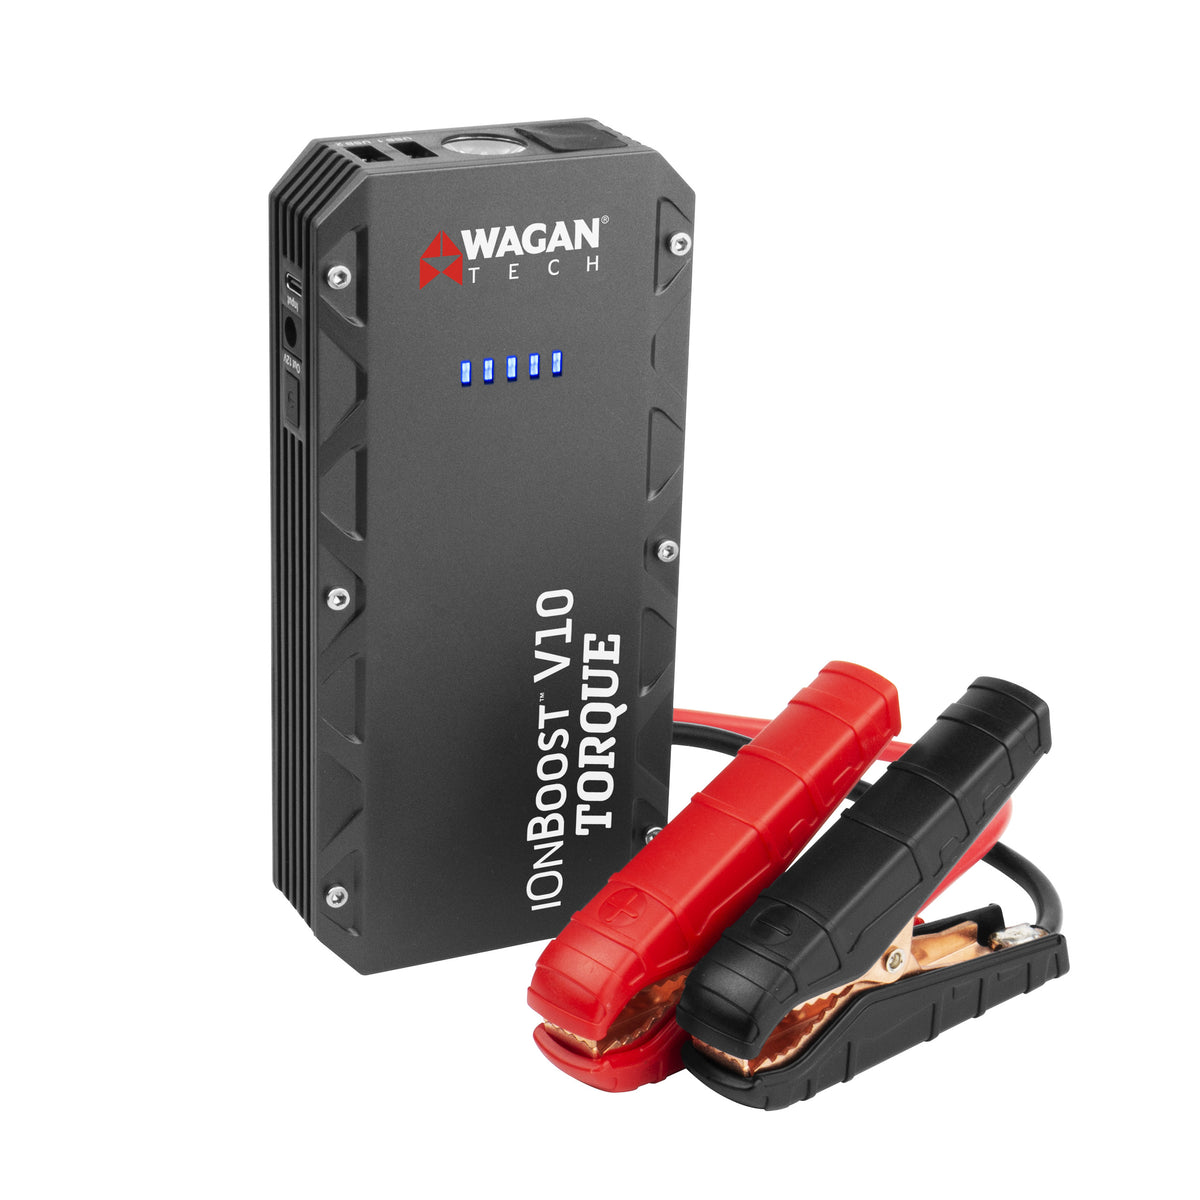 DBPOWER Car Battery Jump Starter 2500A 21800mAh - for up to 8.0L  Gasoline/6.5L Diesel Engines, Portable 12V Auto Battery Booster, Power  Pack, Quick